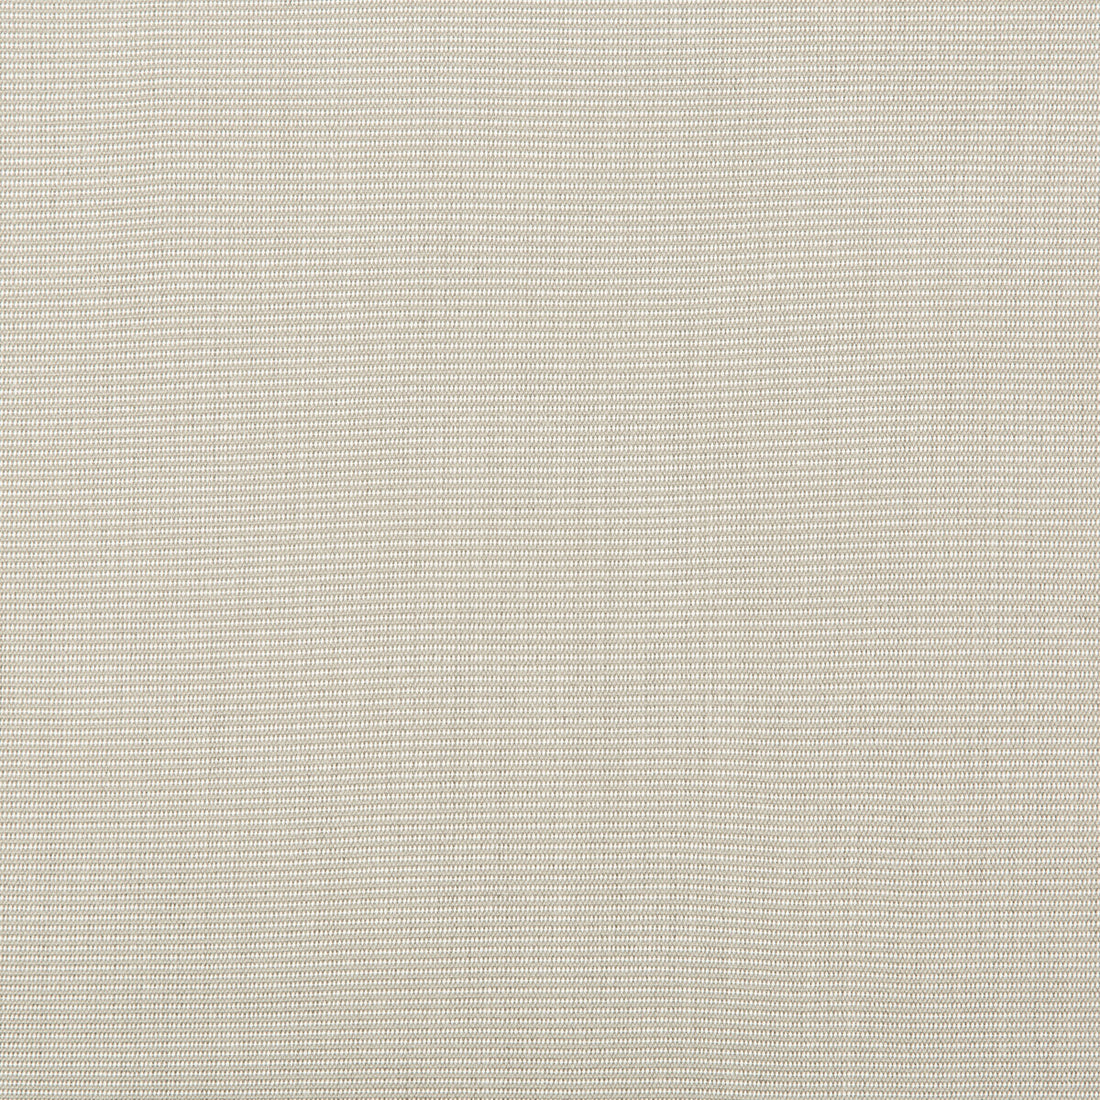 Kravet Basics fabric in 36825-11 color - pattern 36825.11.0 - by Kravet Basics in the Indoor / Outdoor collection